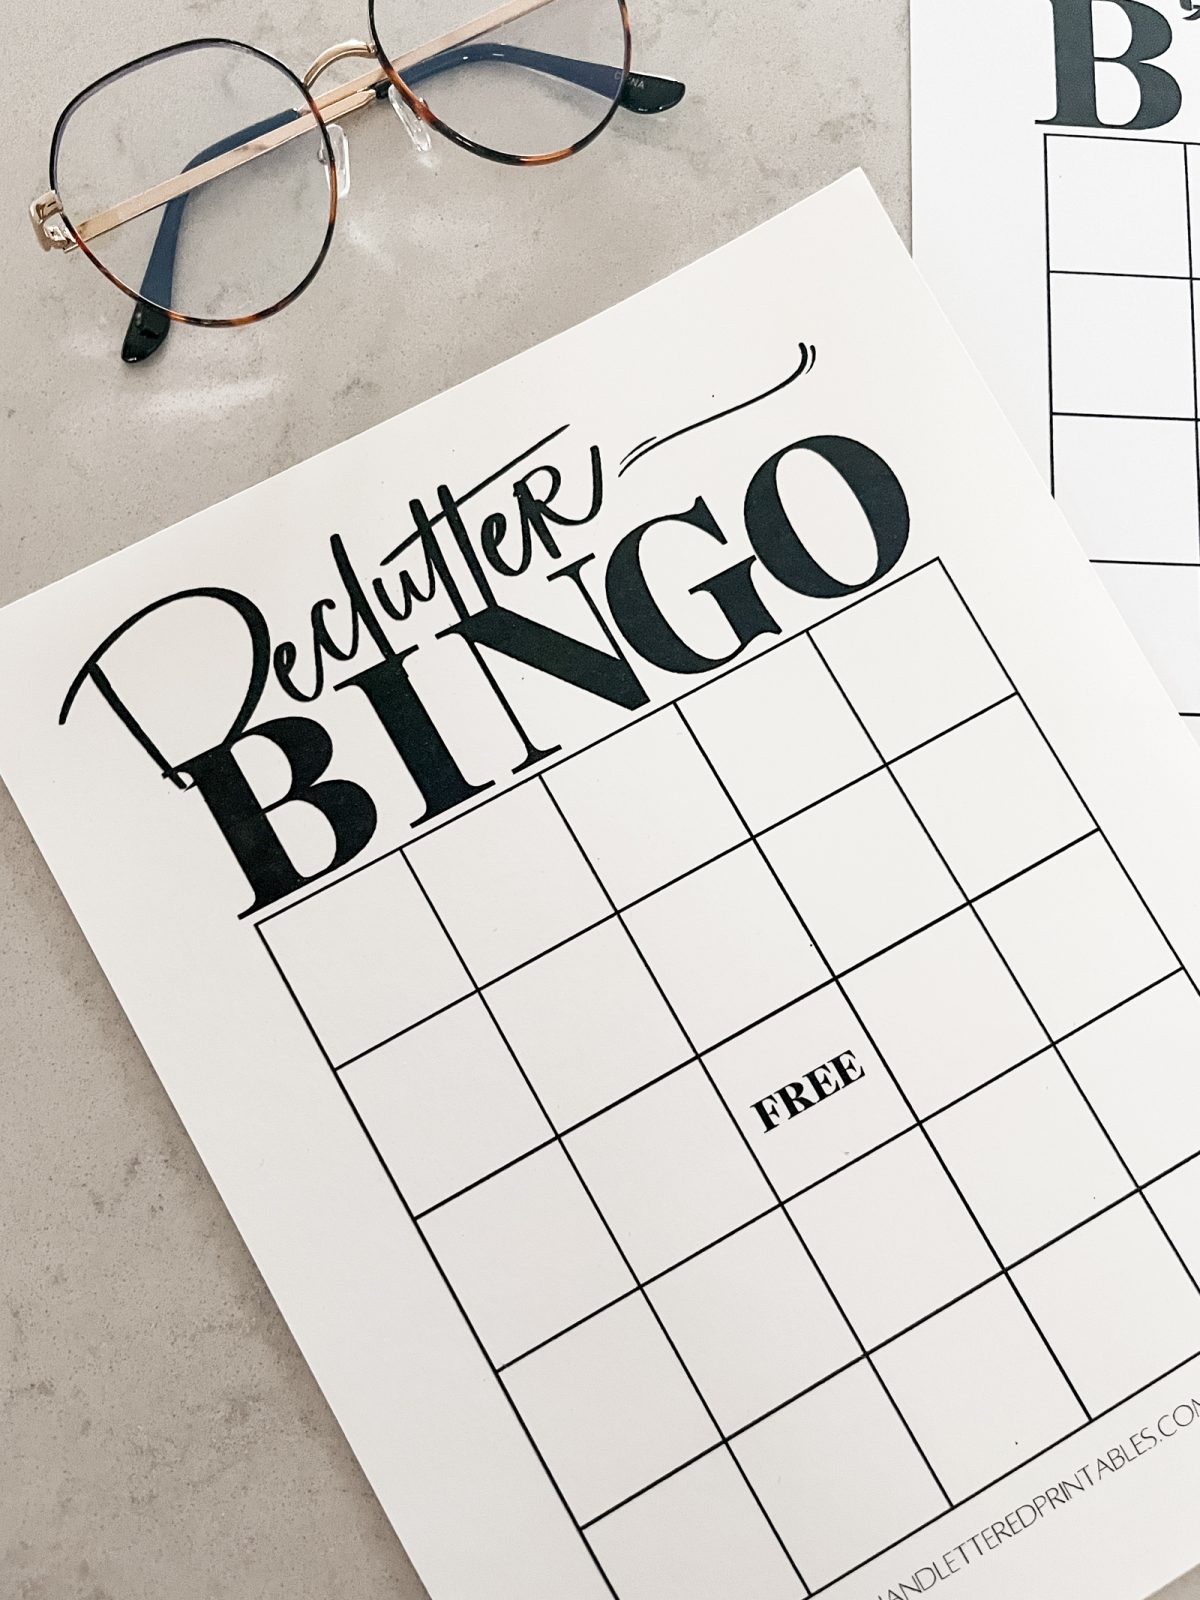 Declutter Bingo Card printed off on counters with glasses